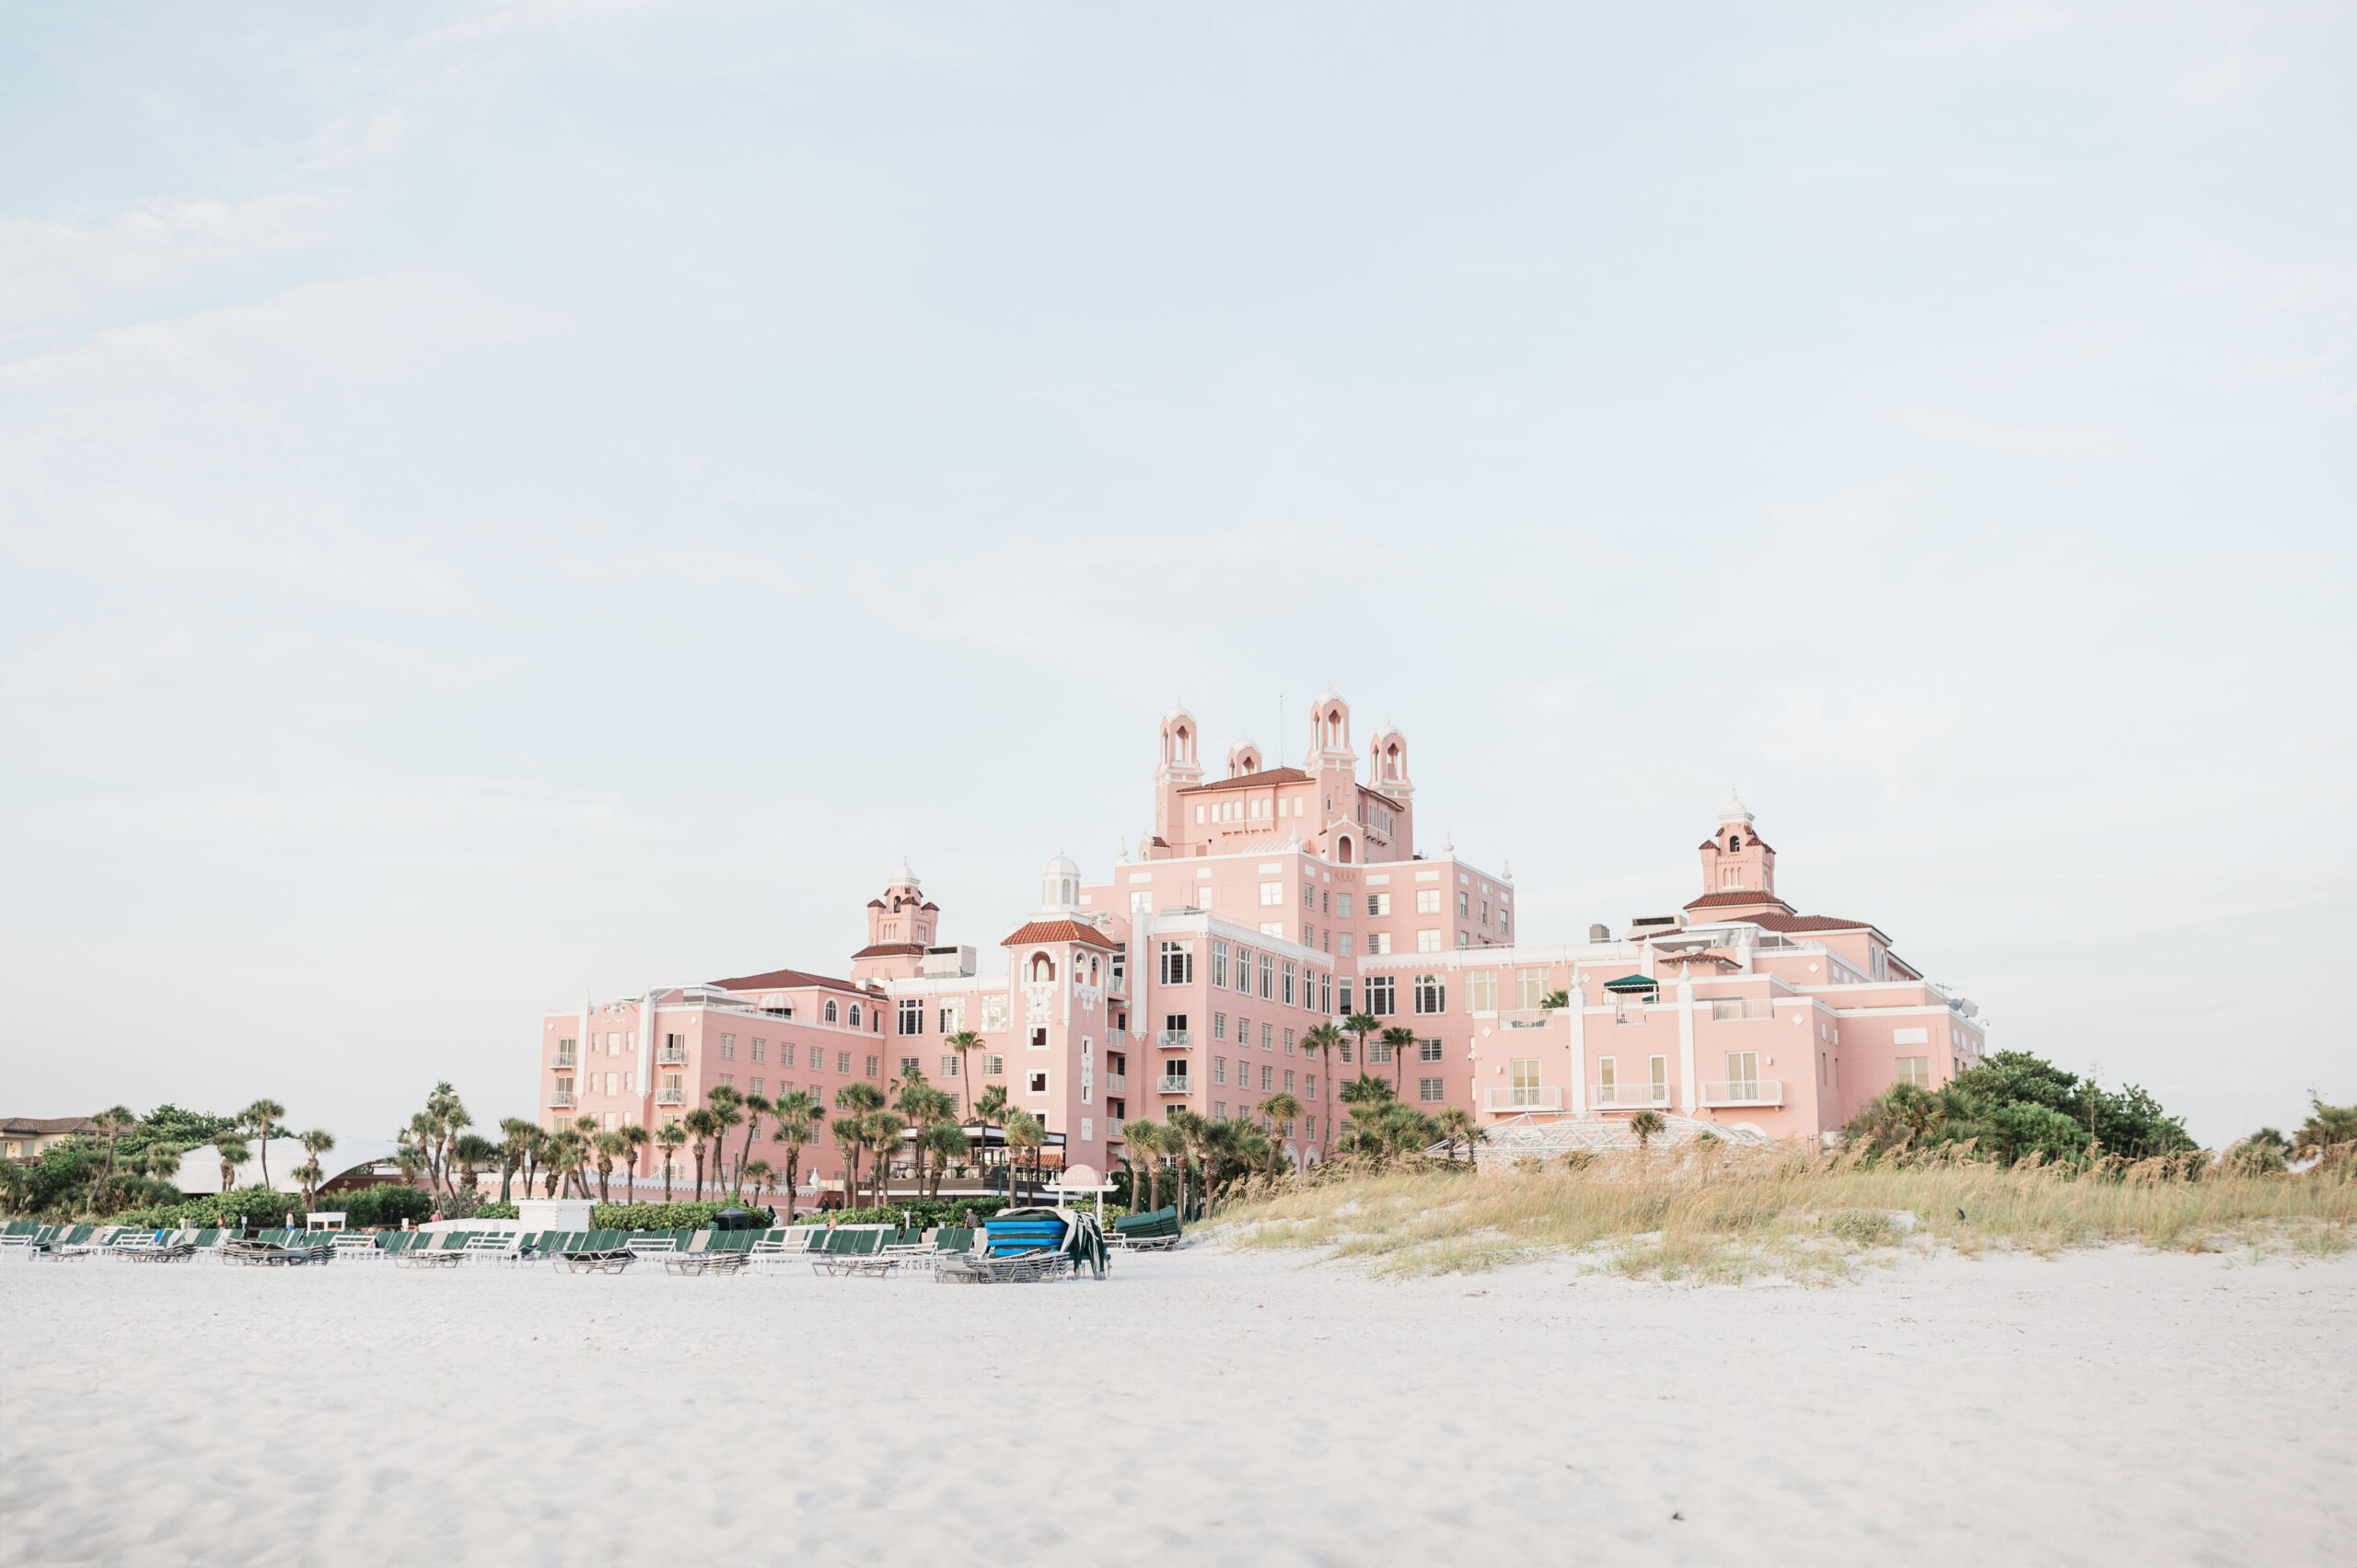 View of The Don CeSar aka The Pink Palace from the beach in Saint Pete, Florida